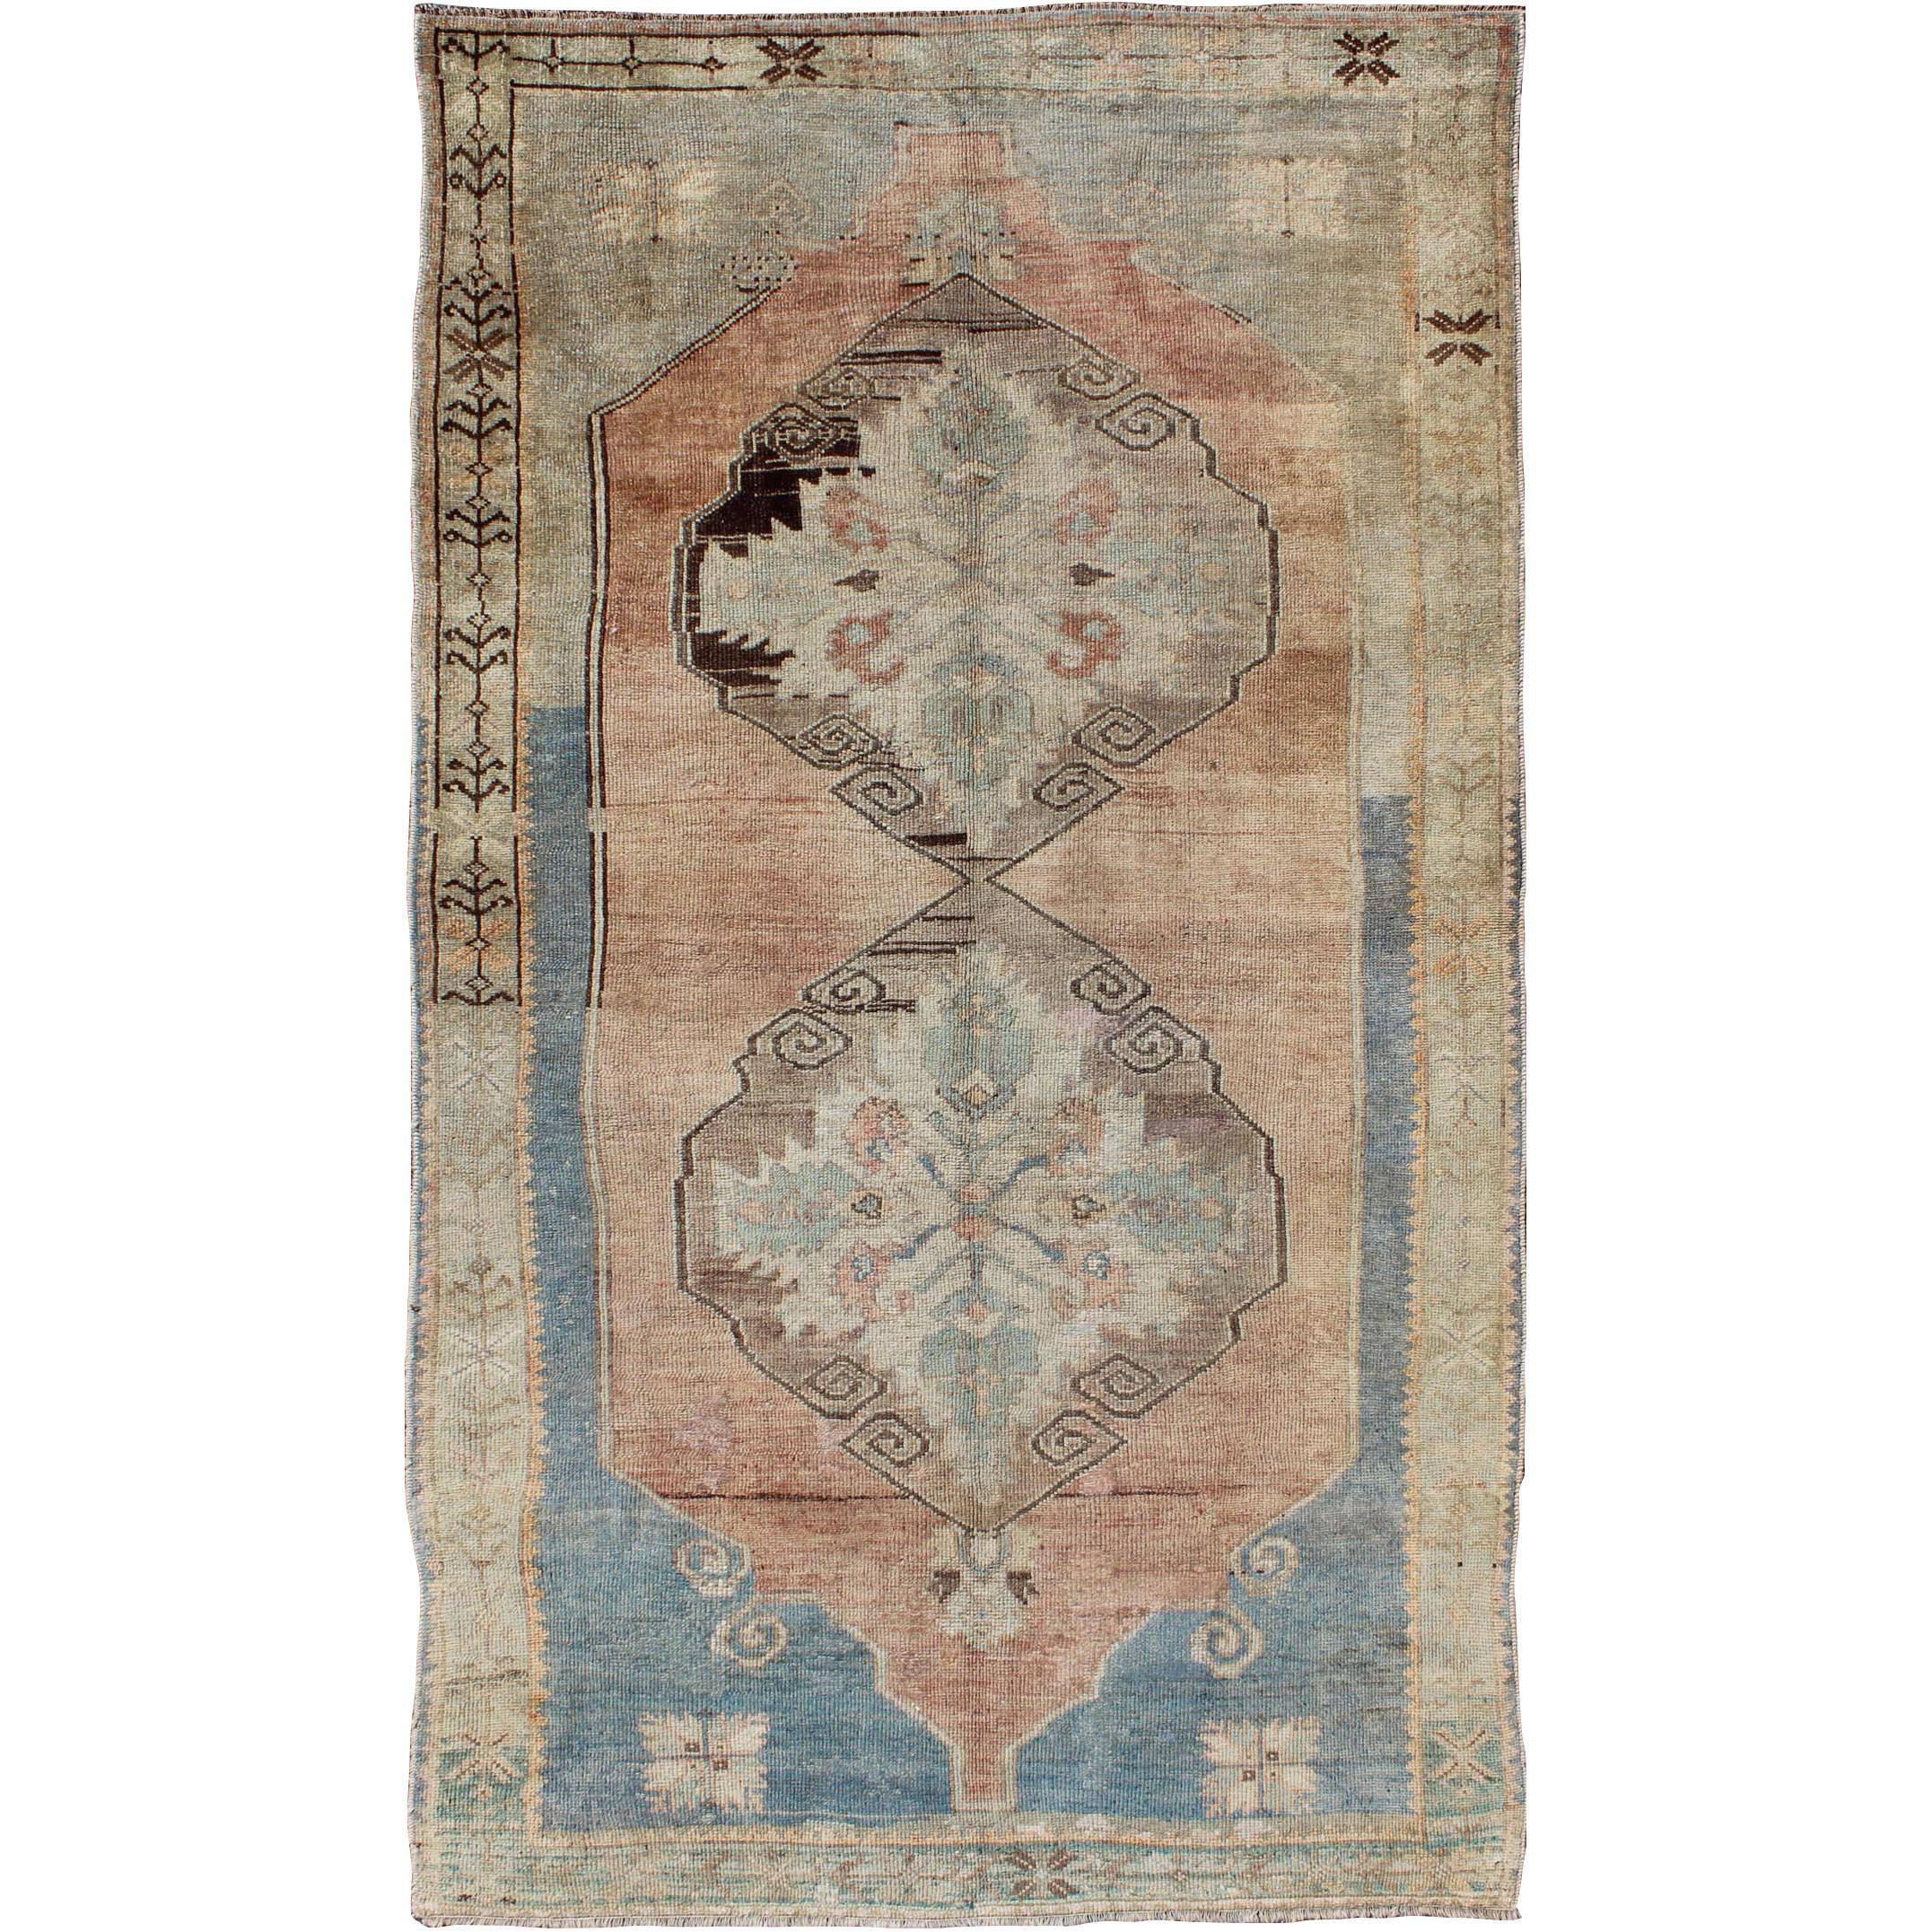 Dual Medallion Antique Turkish Oushak Rug in Reddish Brown, Blue and Green